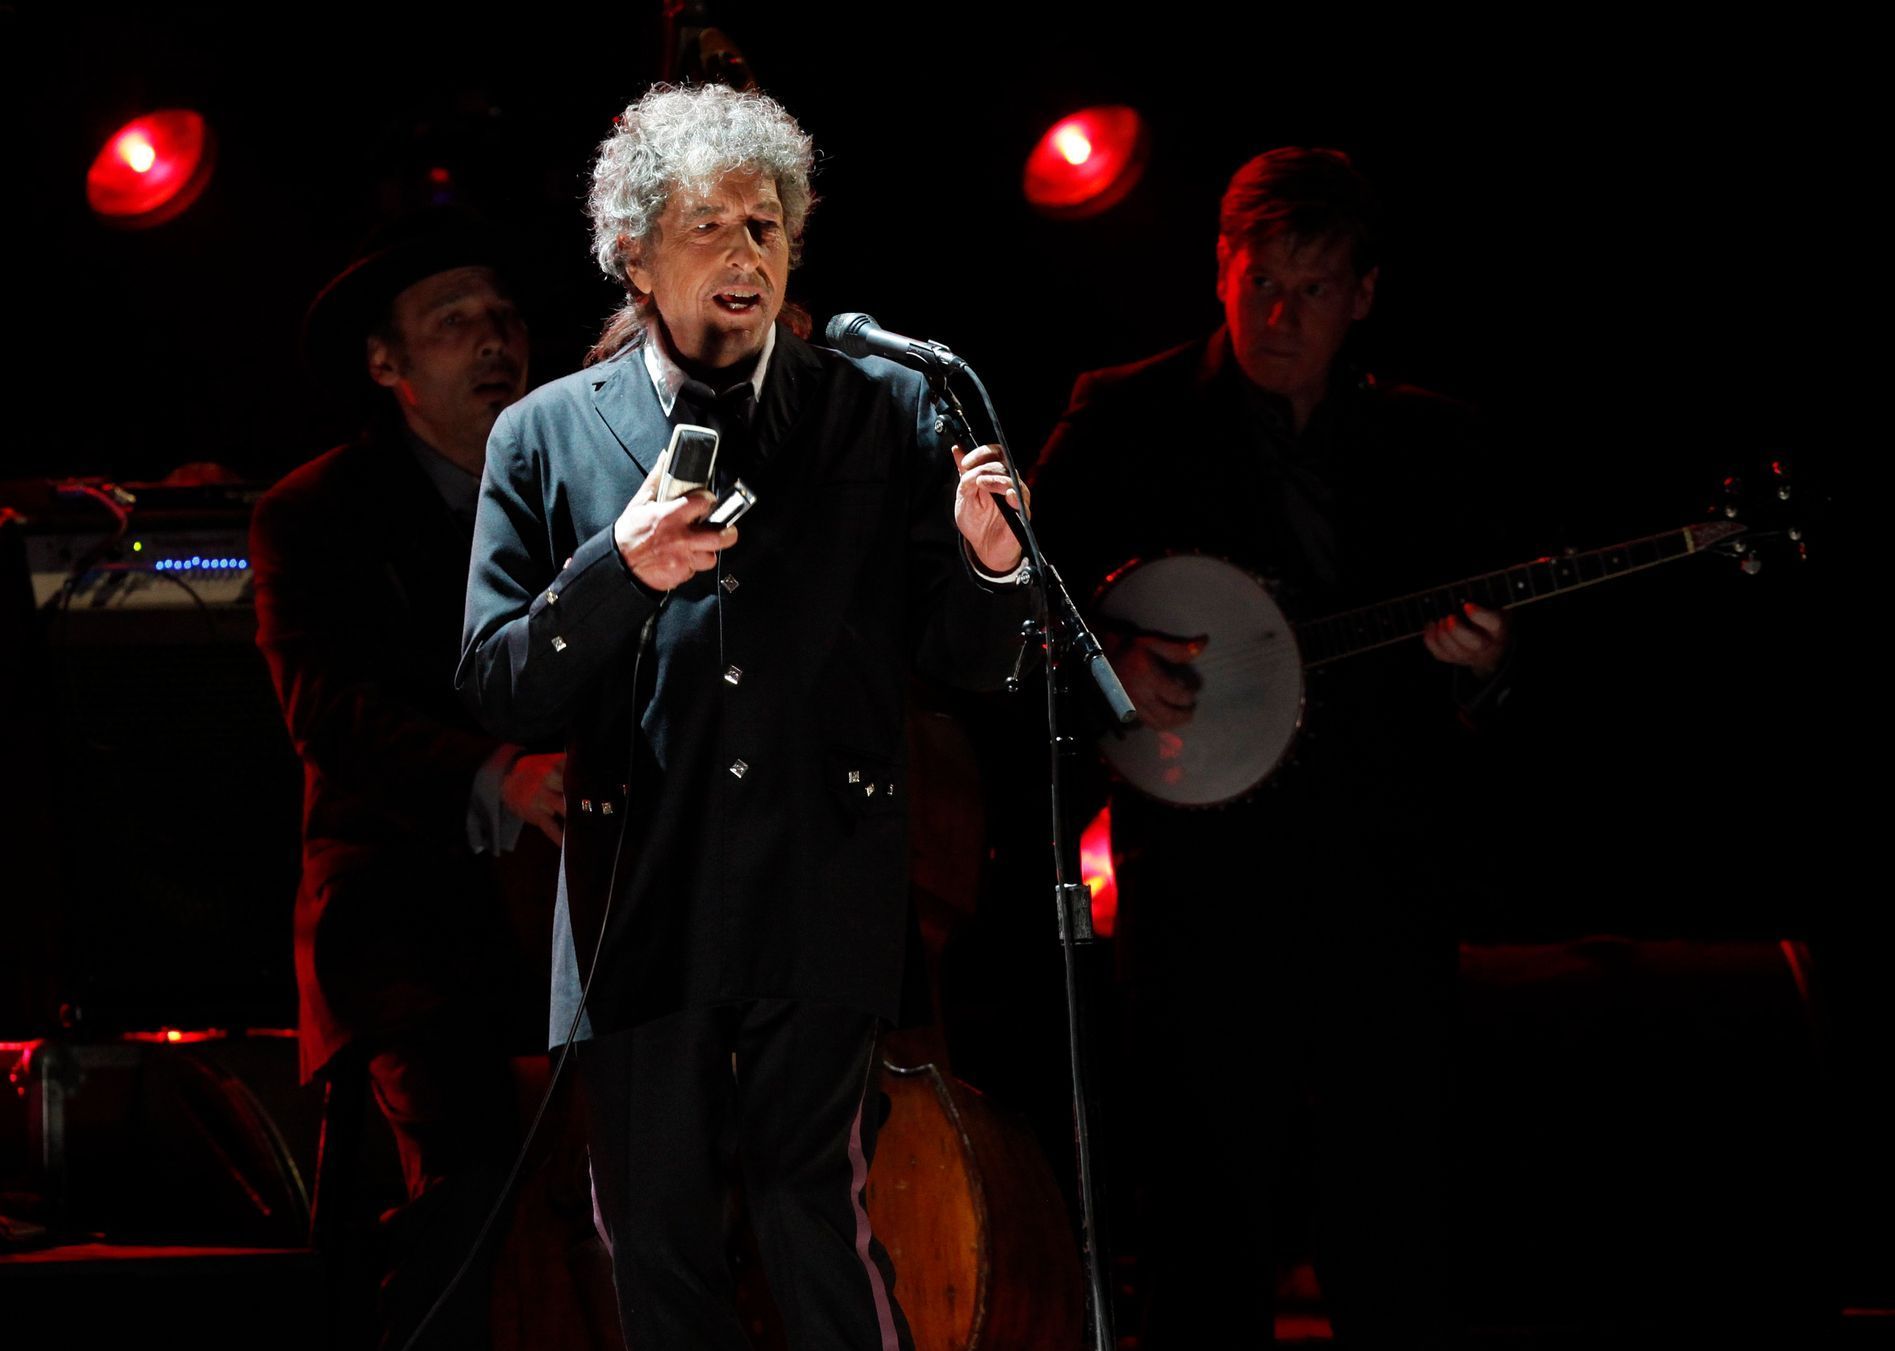 File photo of singer Bob Dylan performing during a segment honoring Director Martin Scorsese in Los Angeles